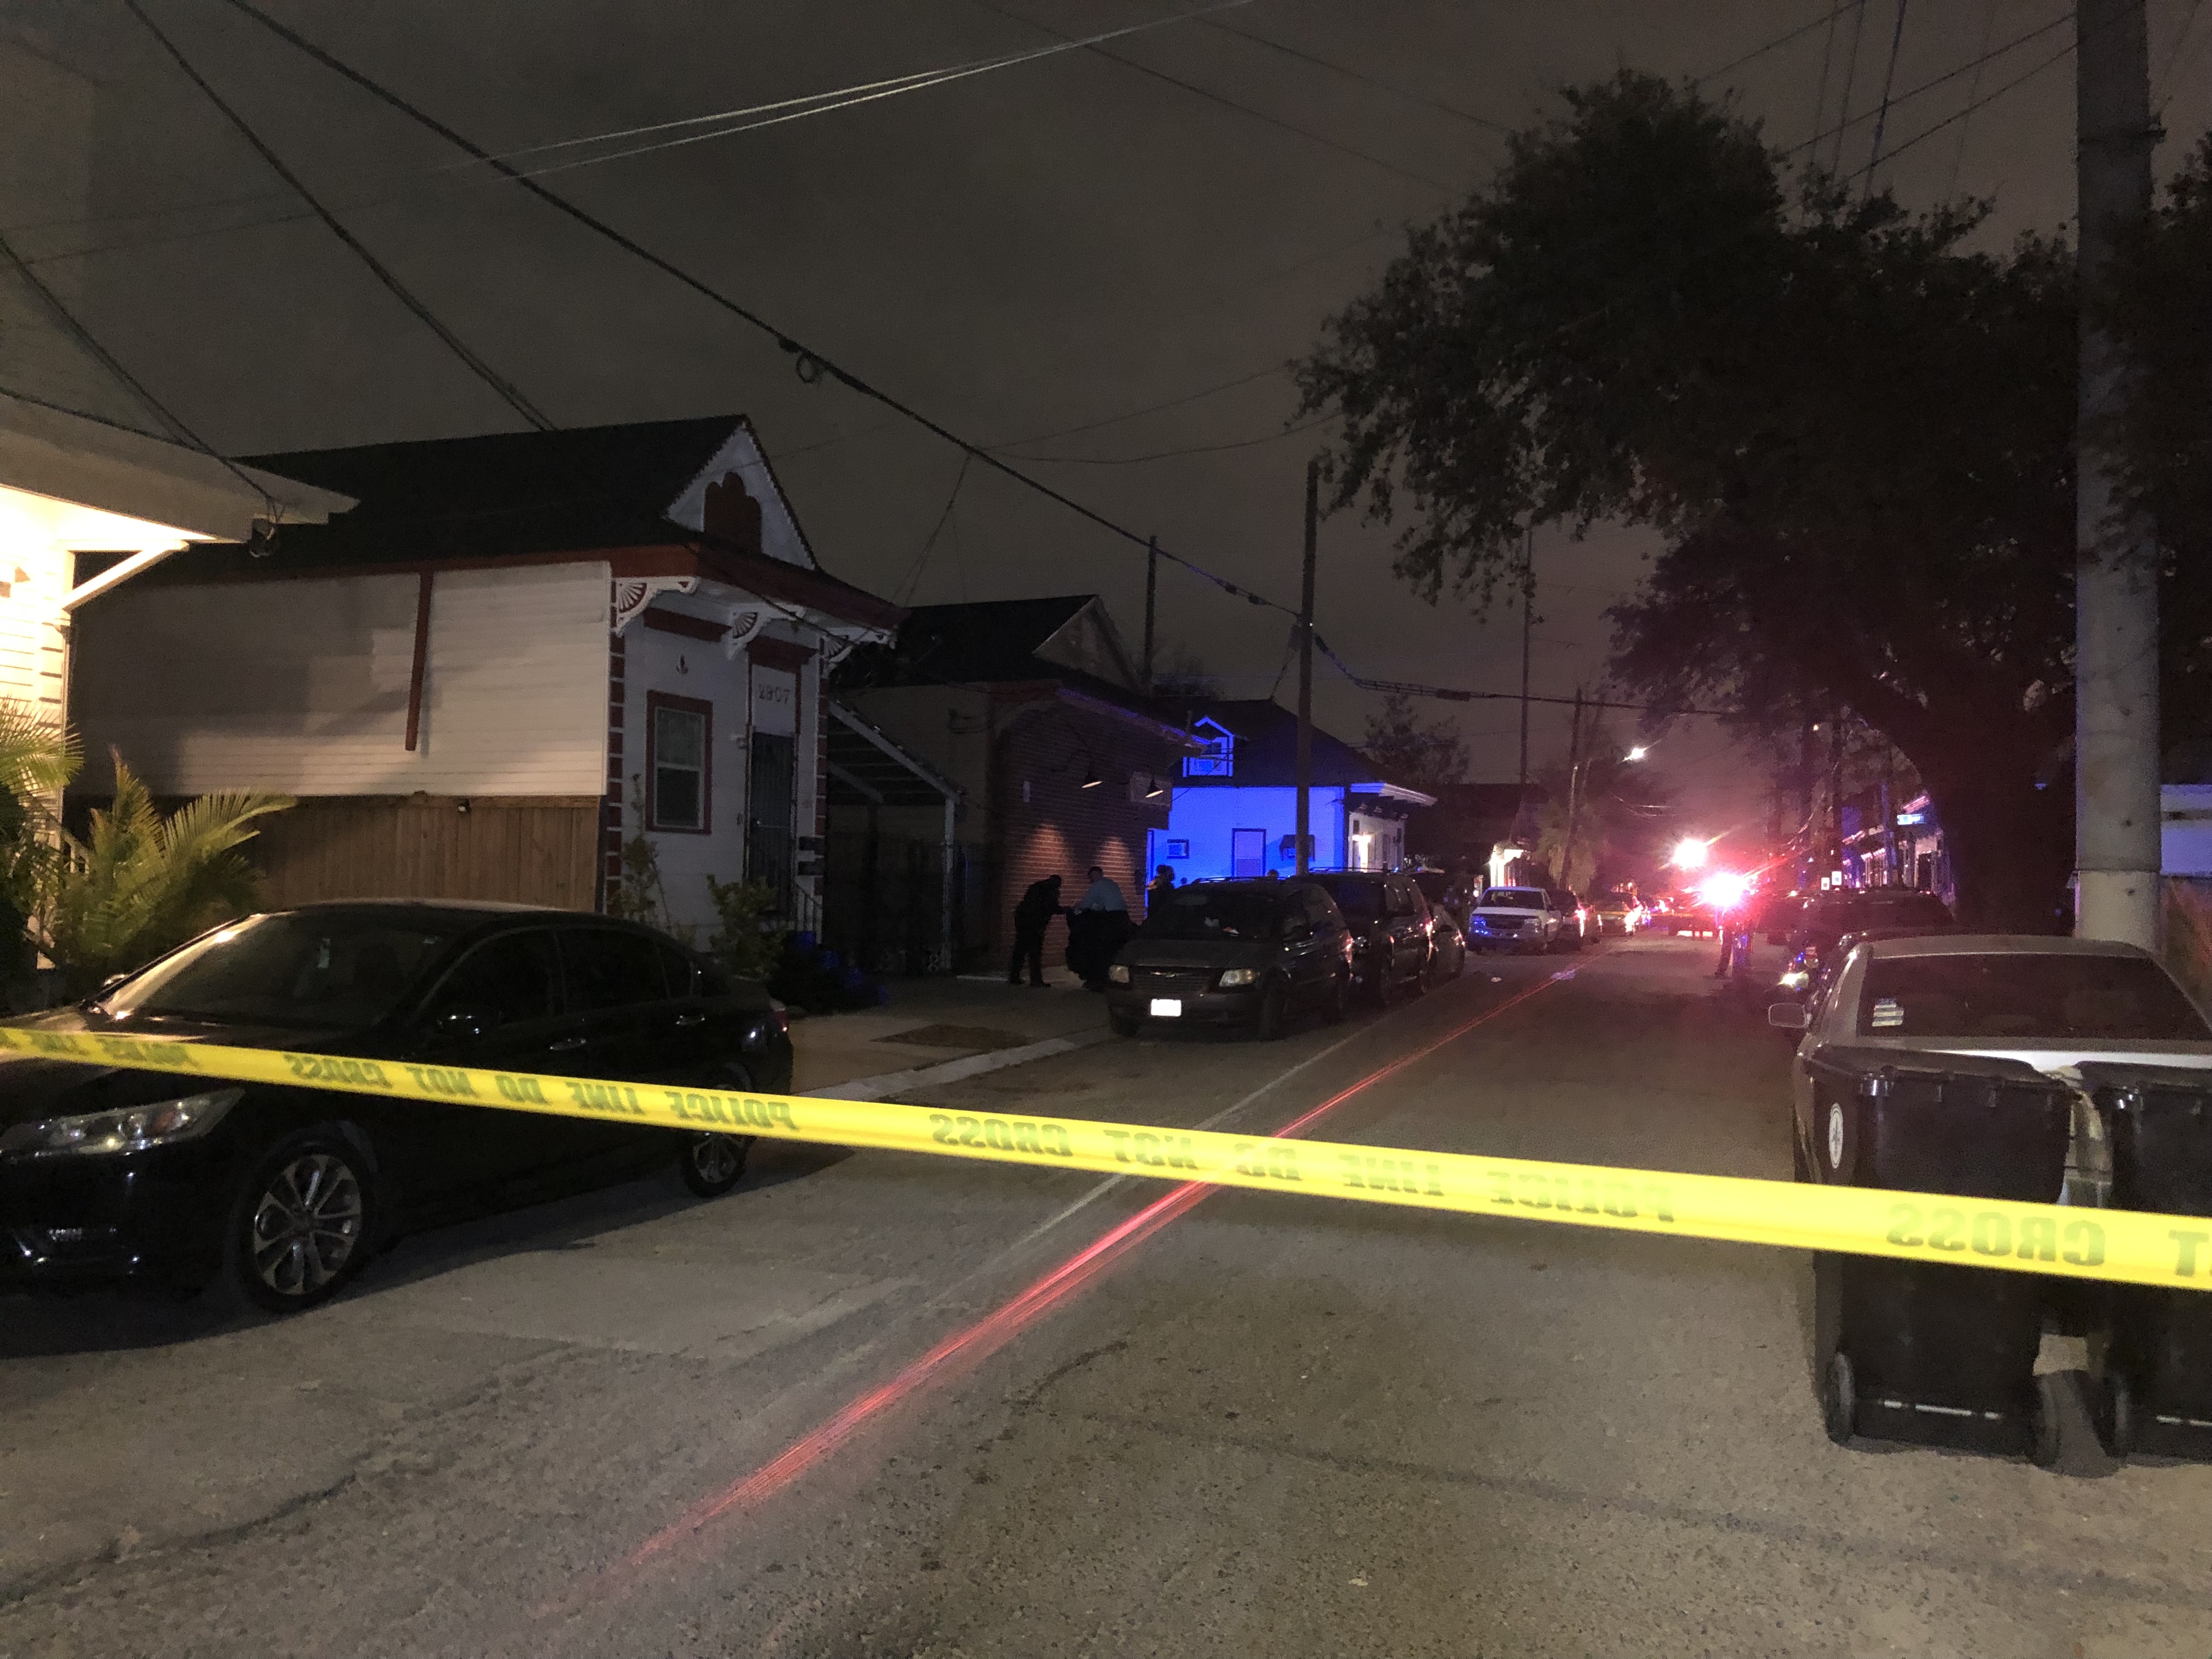 https://digital-stage.wgno.com/news/crime/breaking-two-men-killed-another-wounded-in-mid-city-double-homicide/